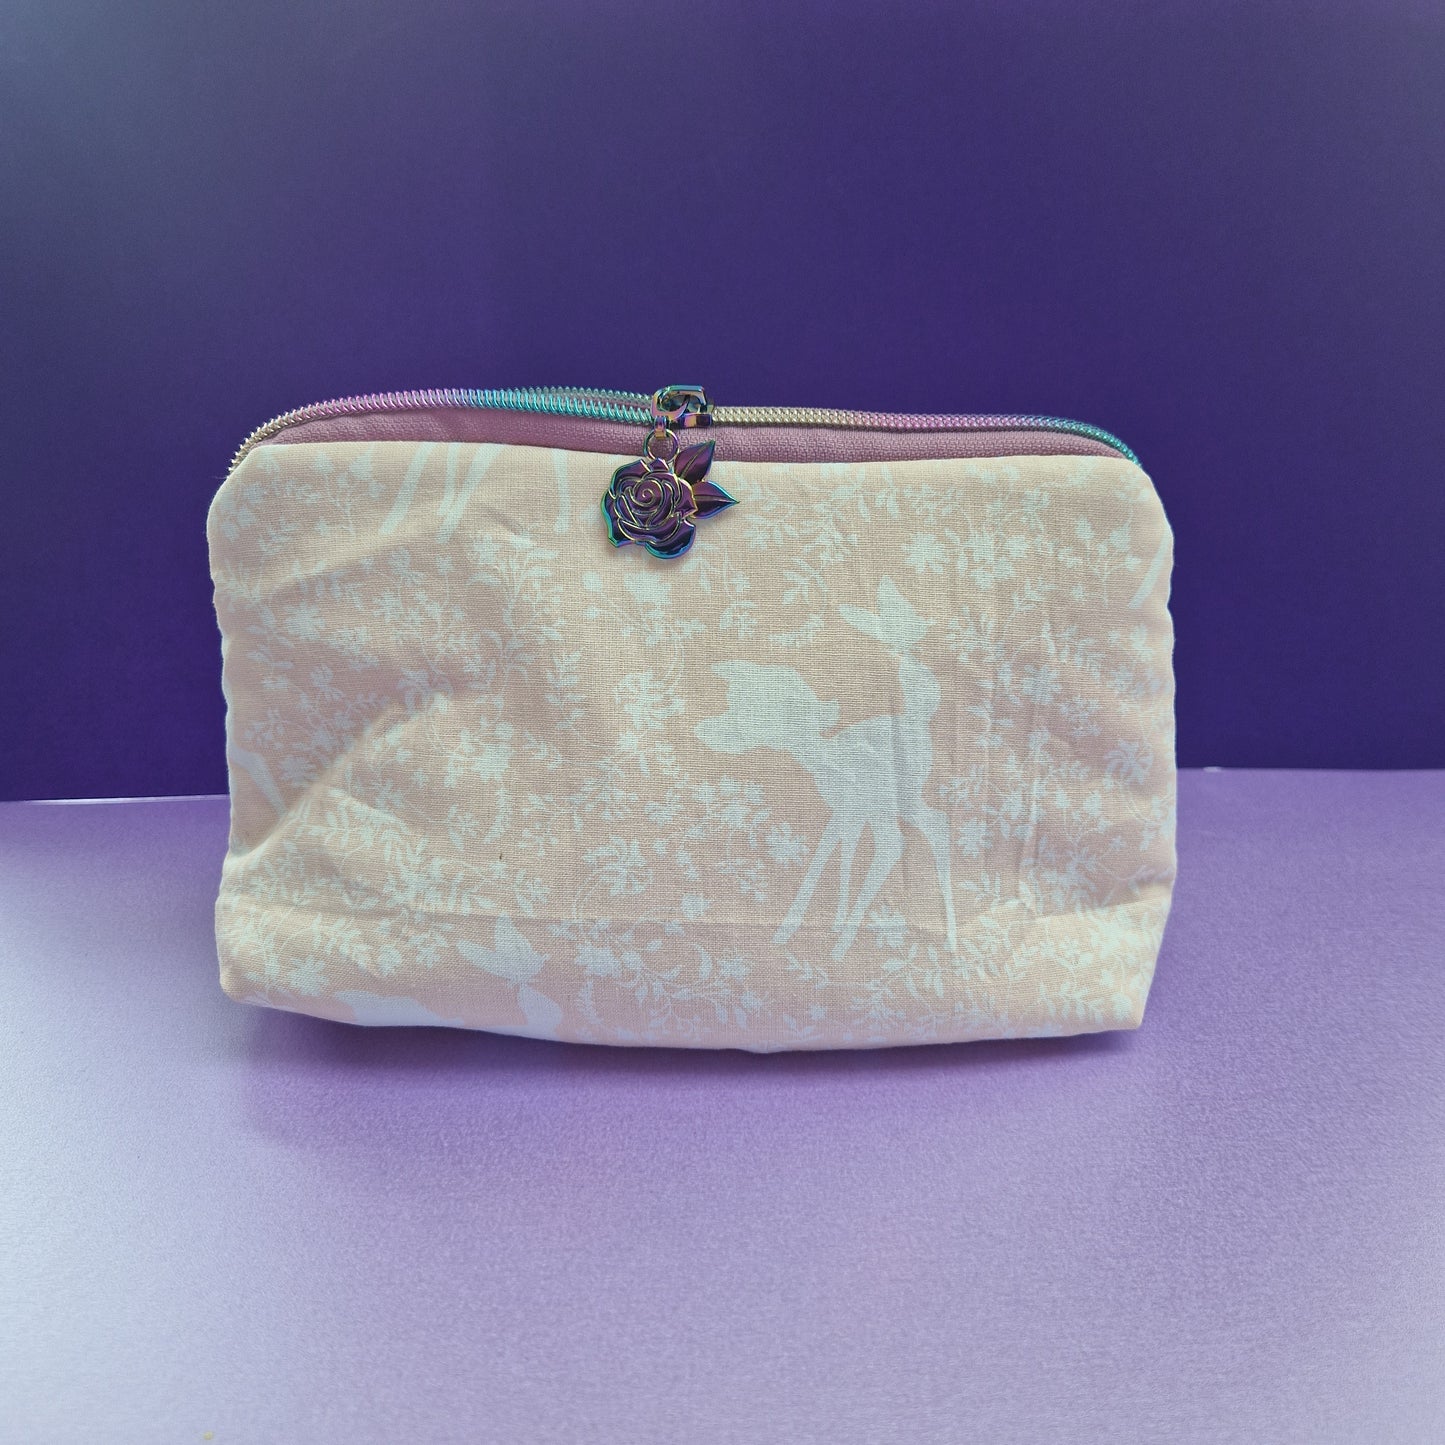 Young Prince Deer lined triangle cosmetic bag with rose zipper pull